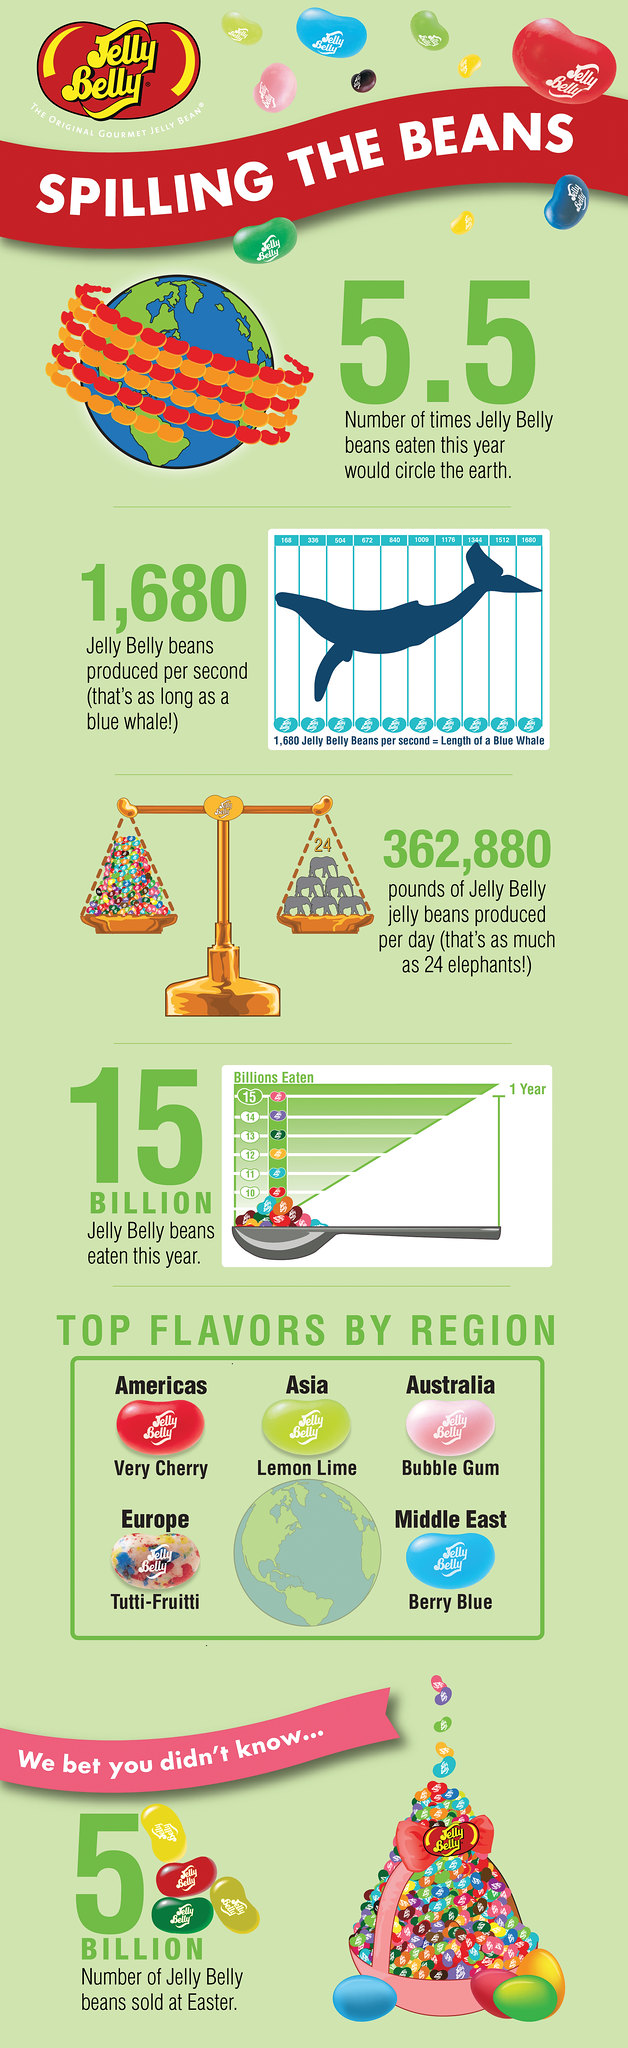 Spilling the Beans Infographic